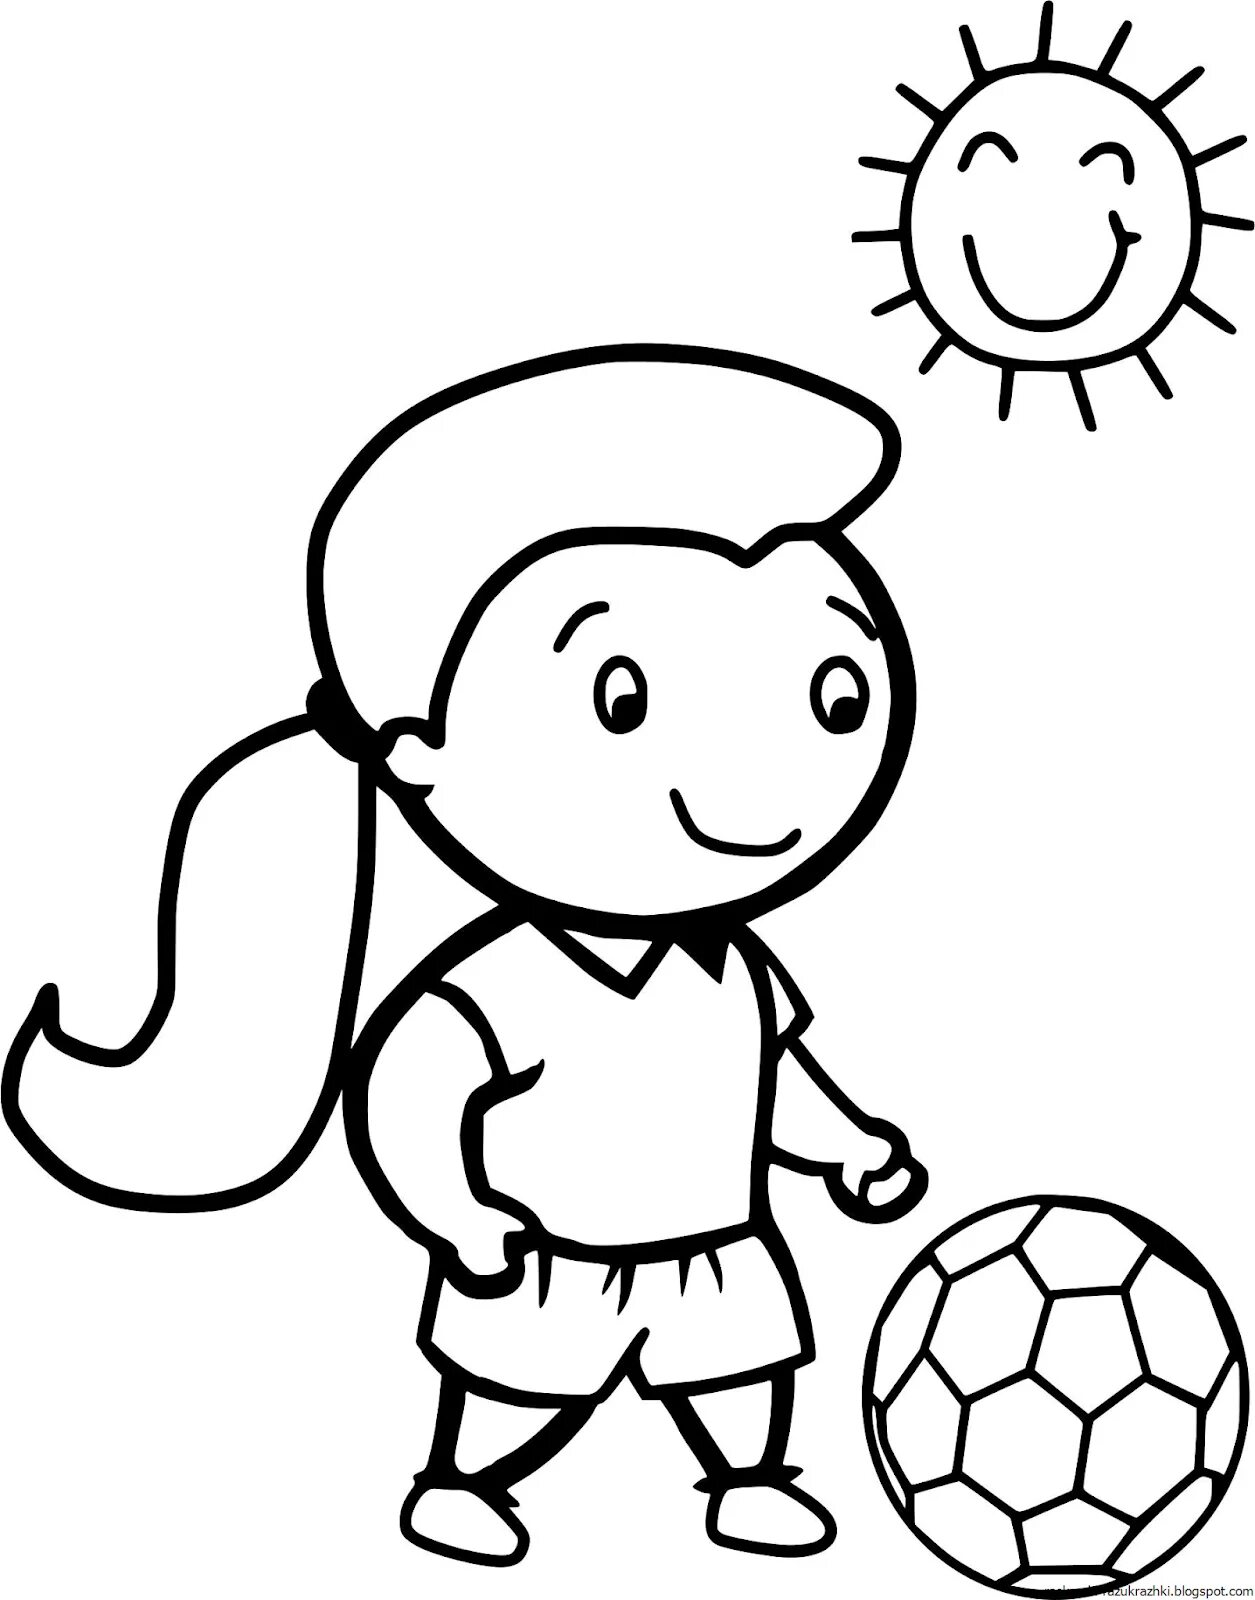 Color-fiesta sports coloring page for children 3-4 years old